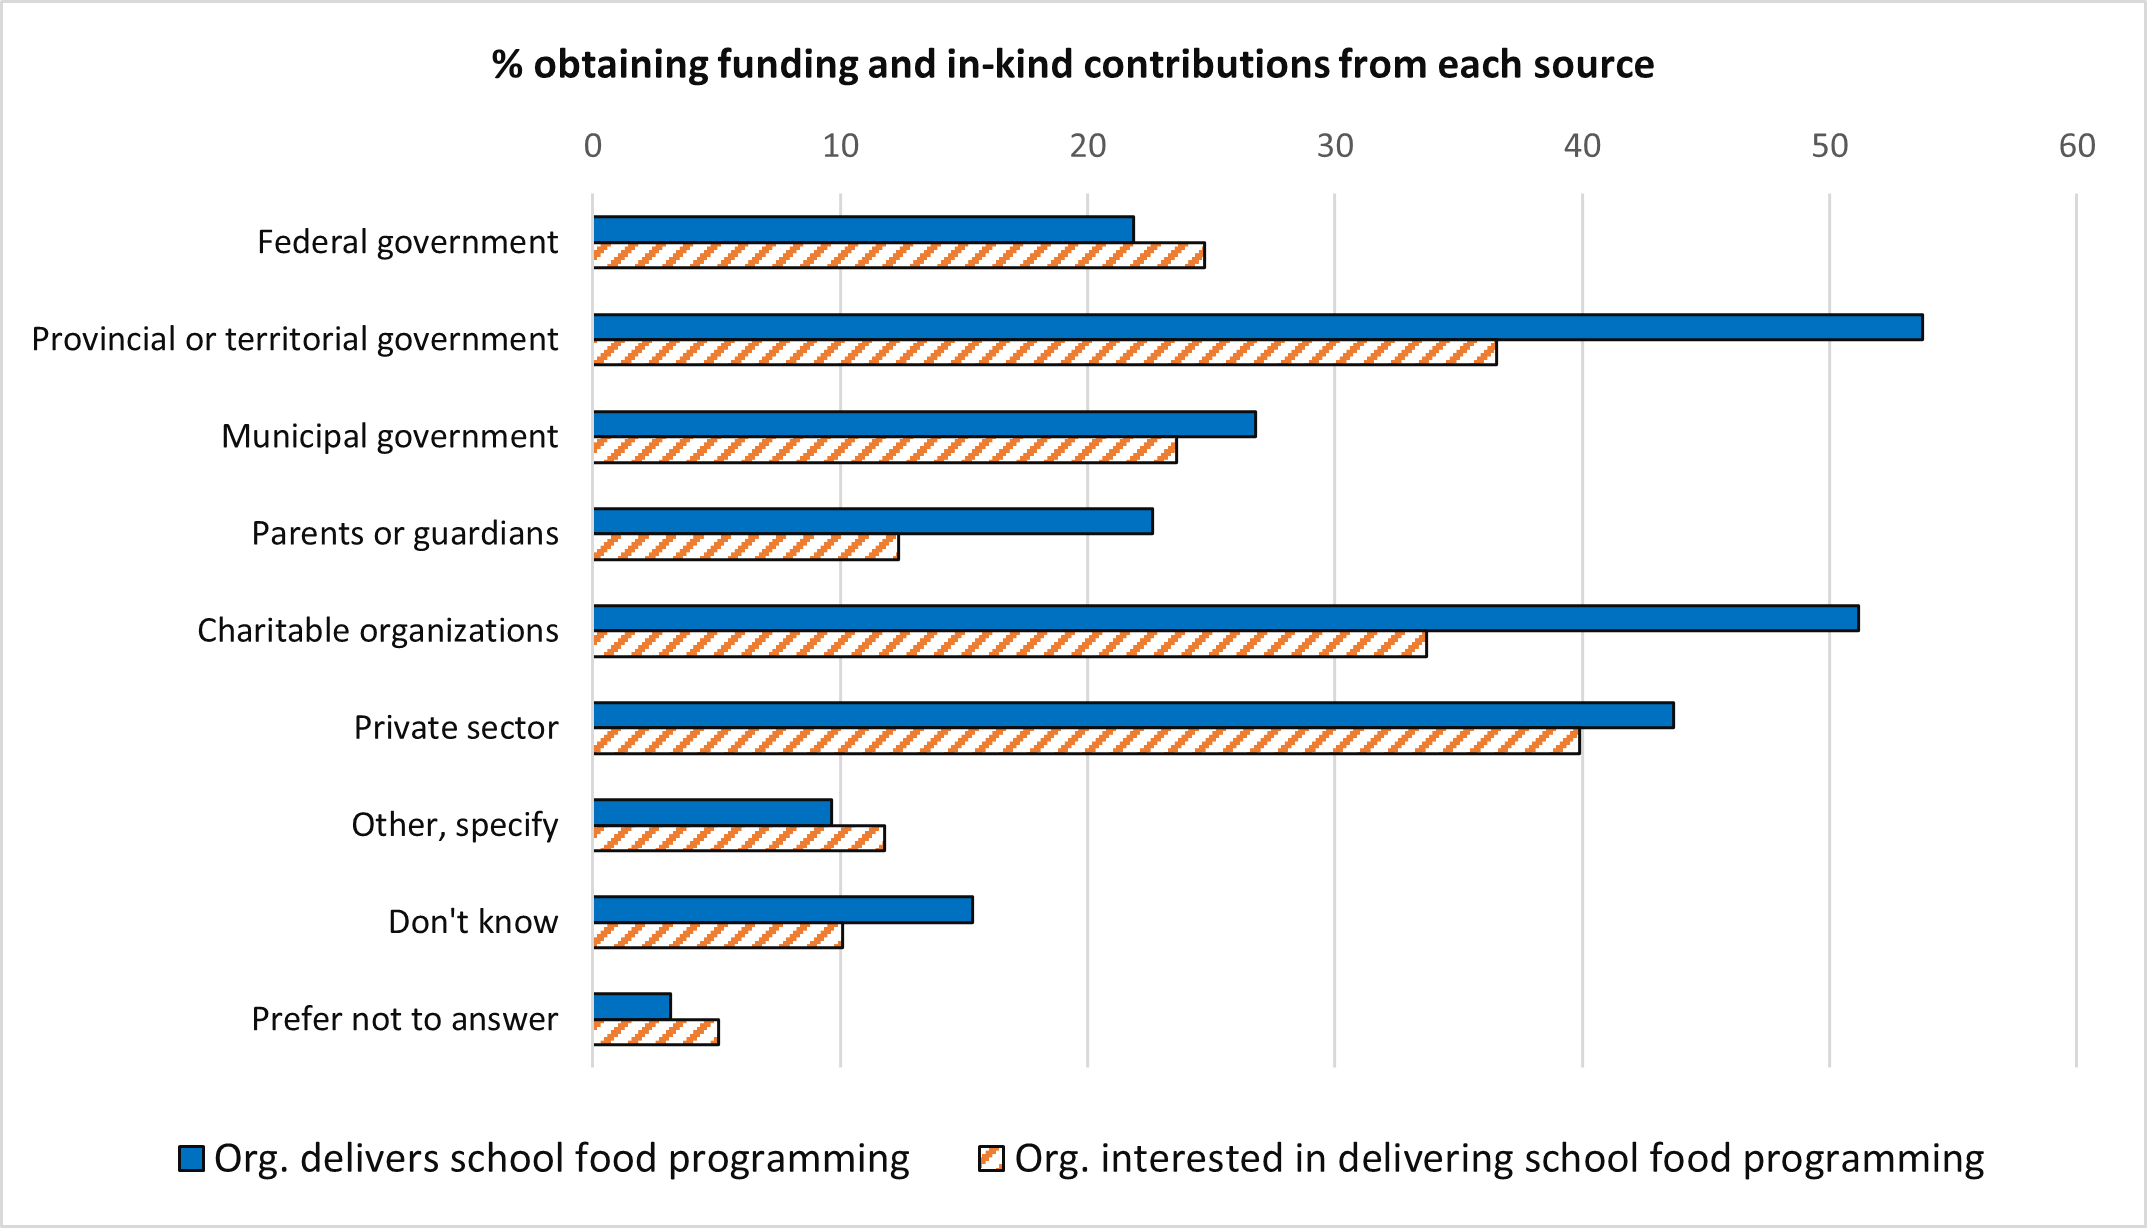 A bar chart of the percent of organizational respondents obtaining funding and in-kind contributions from each source. Text version below.